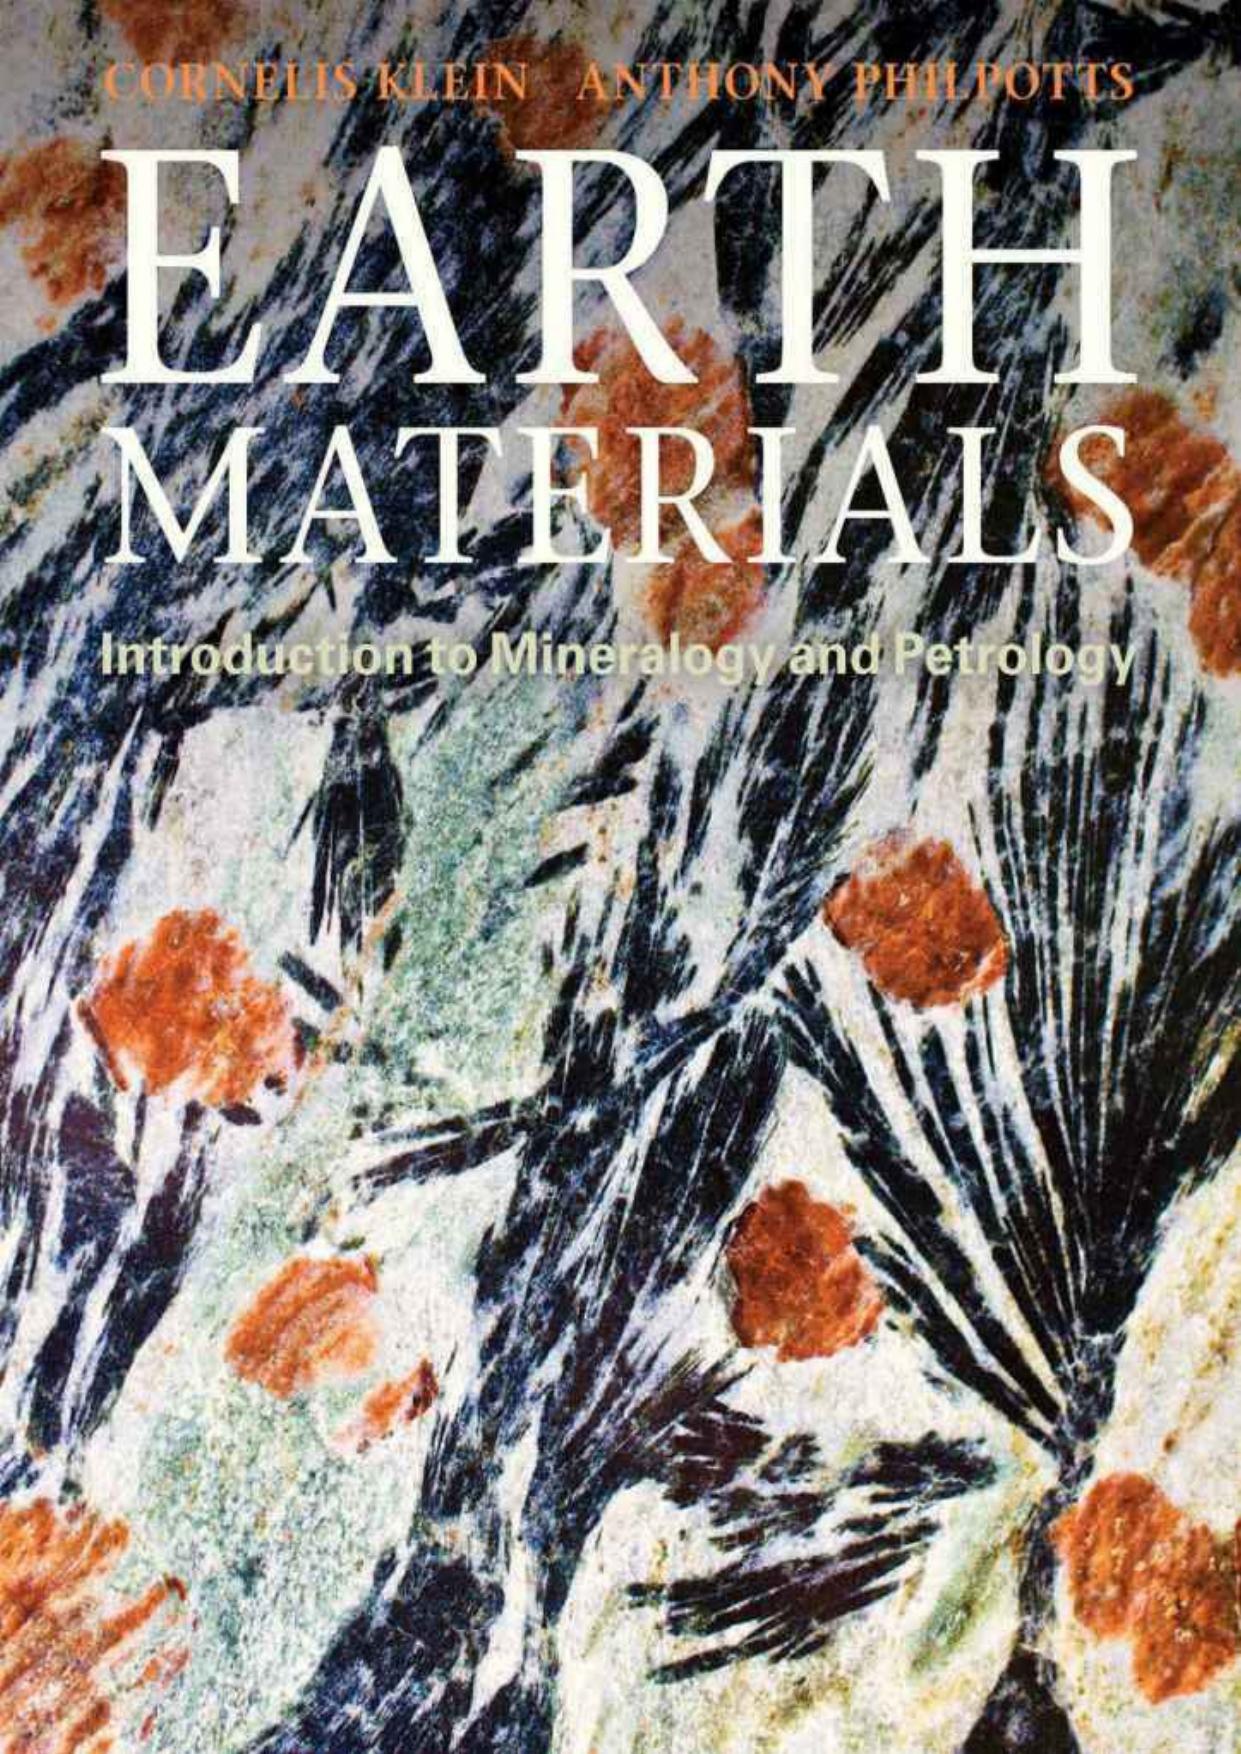 Earth Materials Introduction to Mineralogy and Petrology.jpg